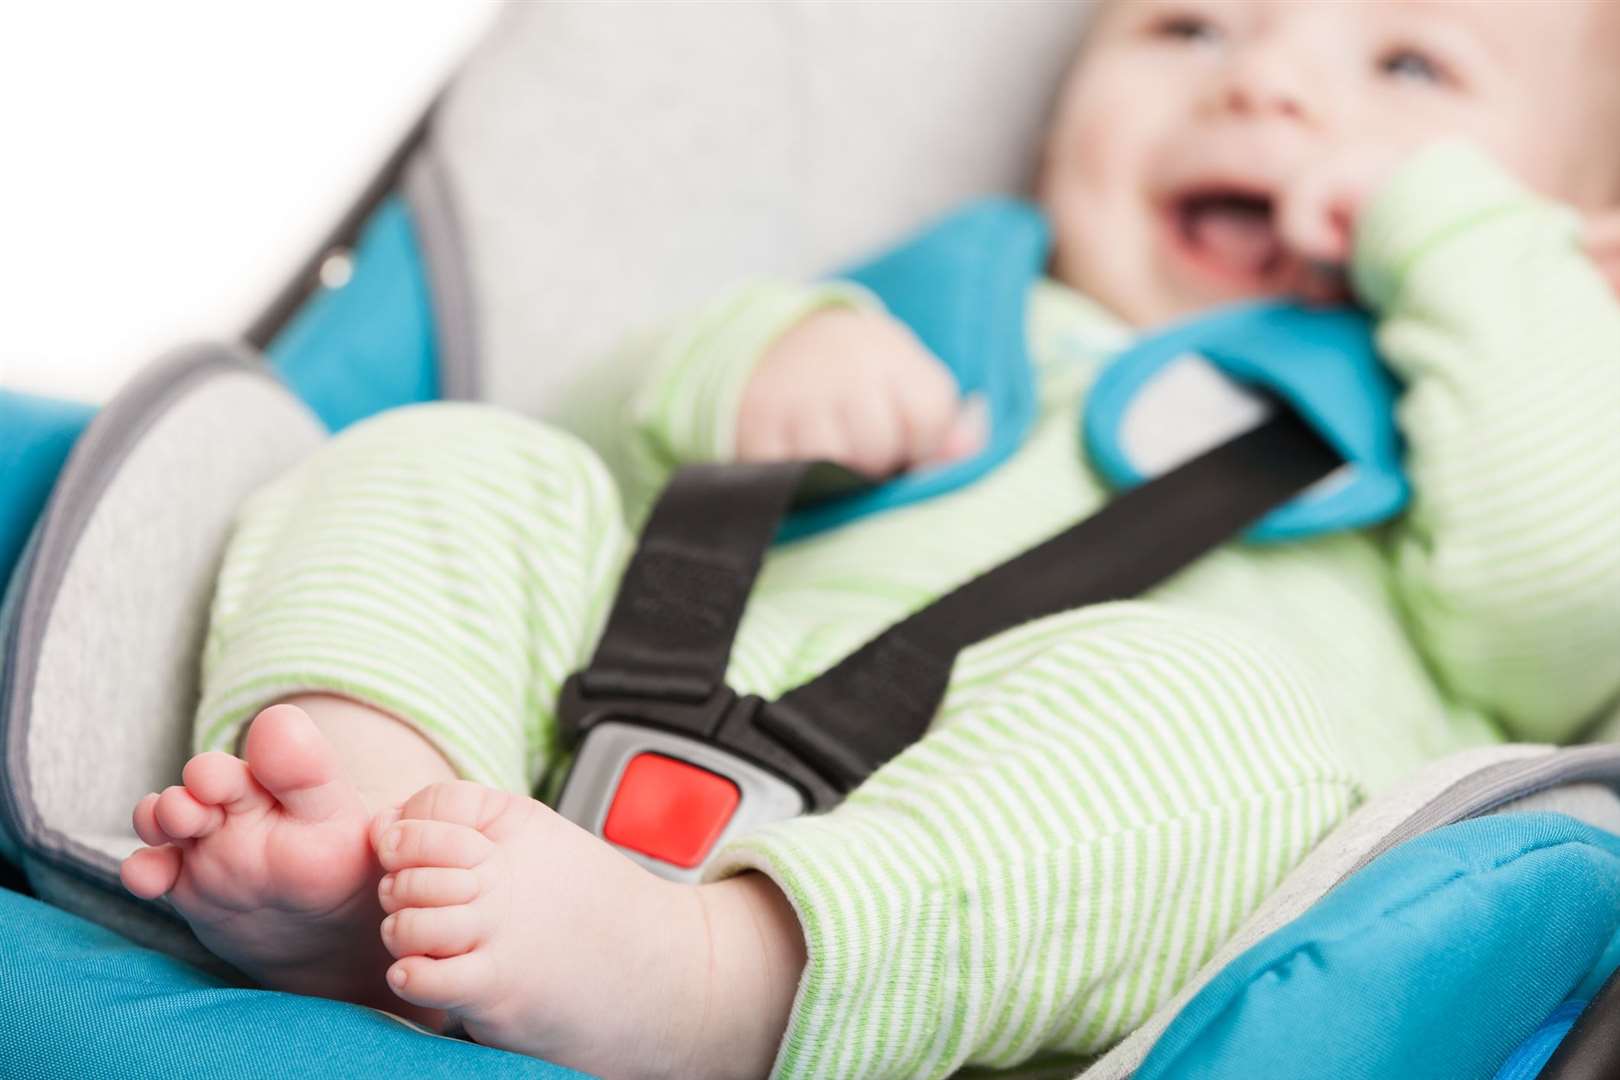 Babies, toddlers and children require a car seat up until the age of 12 by law, with only a few exceptions